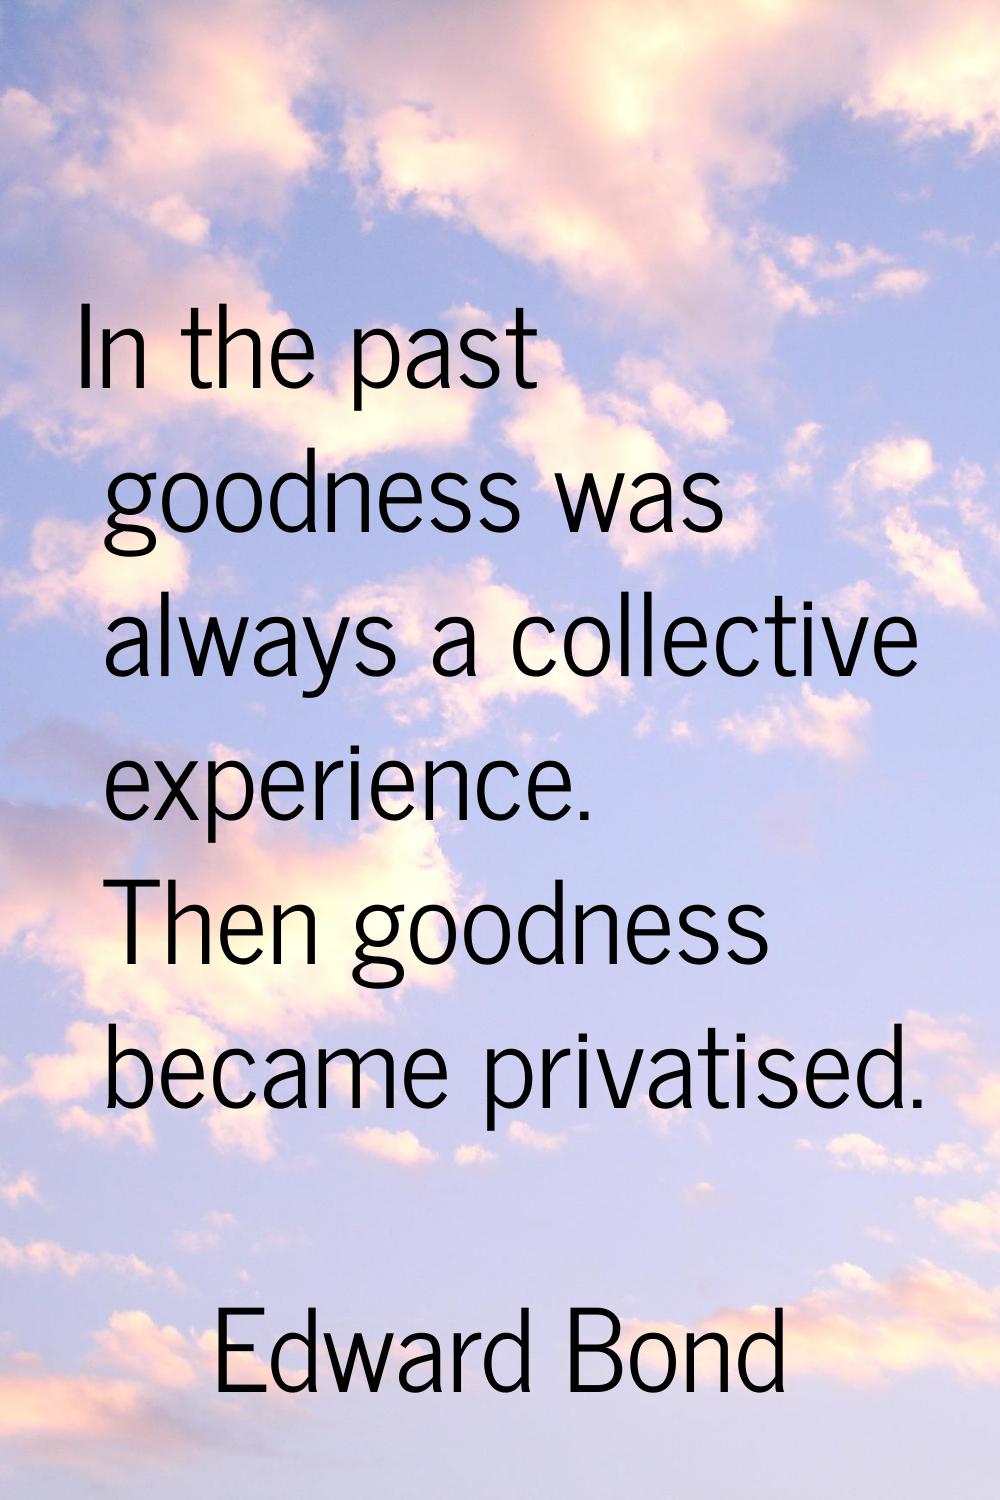 In the past goodness was always a collective experience. Then goodness became privatised.